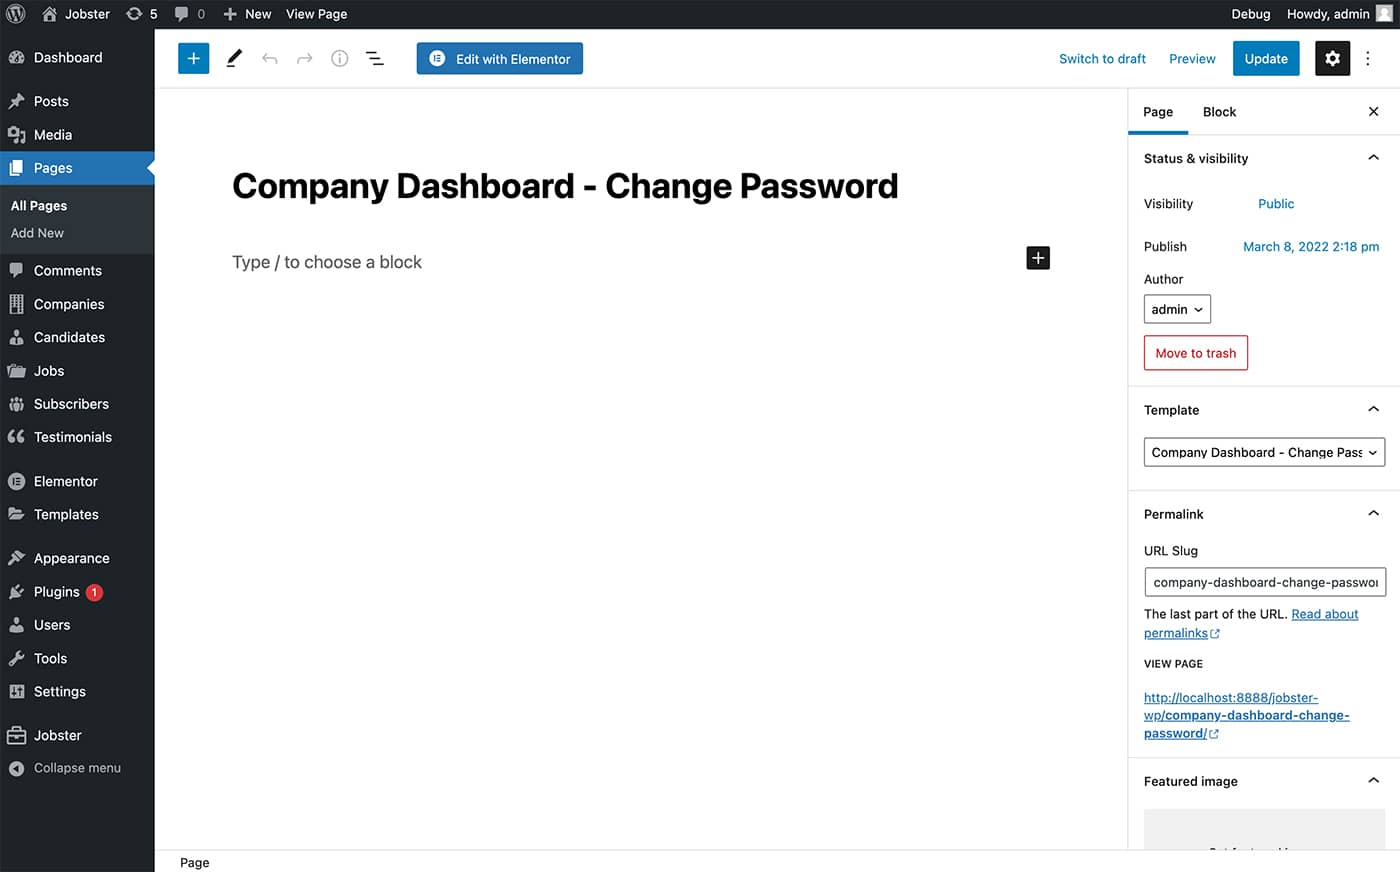 Jobster company dashboard change password page template